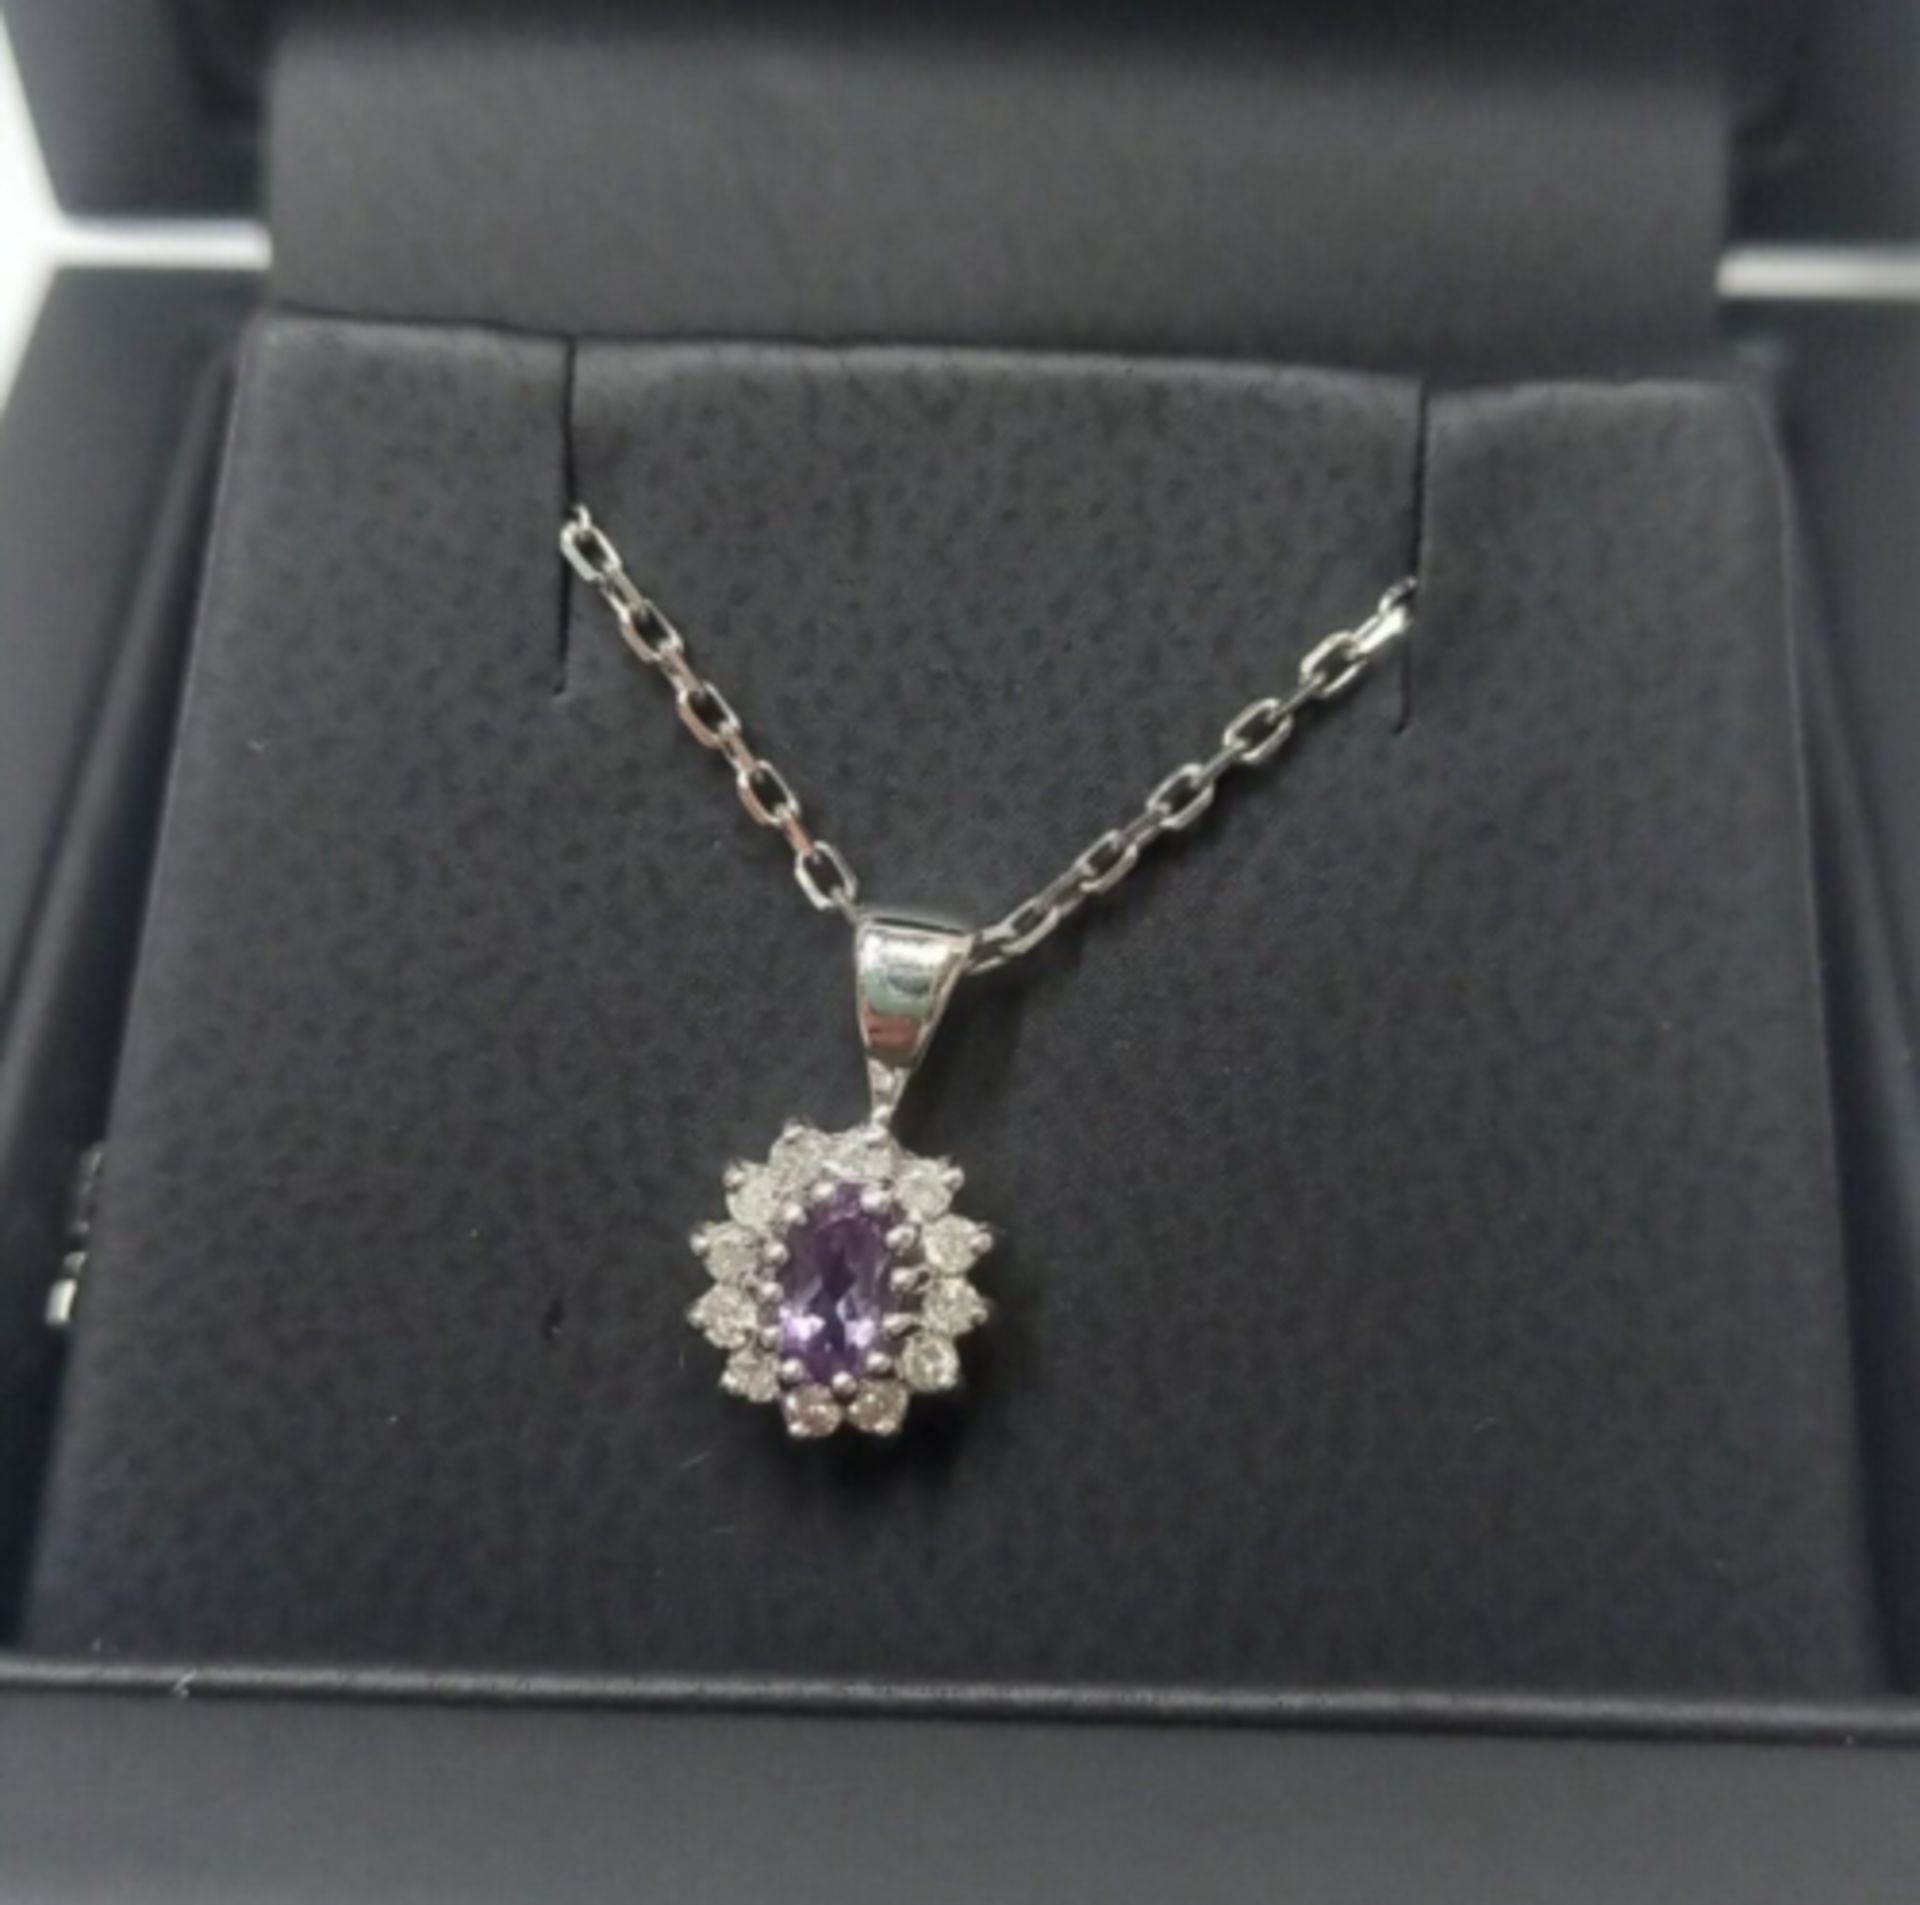 0.12CT DIAMOND & AMYTHIST PENDANT 9CT WHITE GOLD IN GIFT BOX + VALUATION CERTIFICATE OF £795